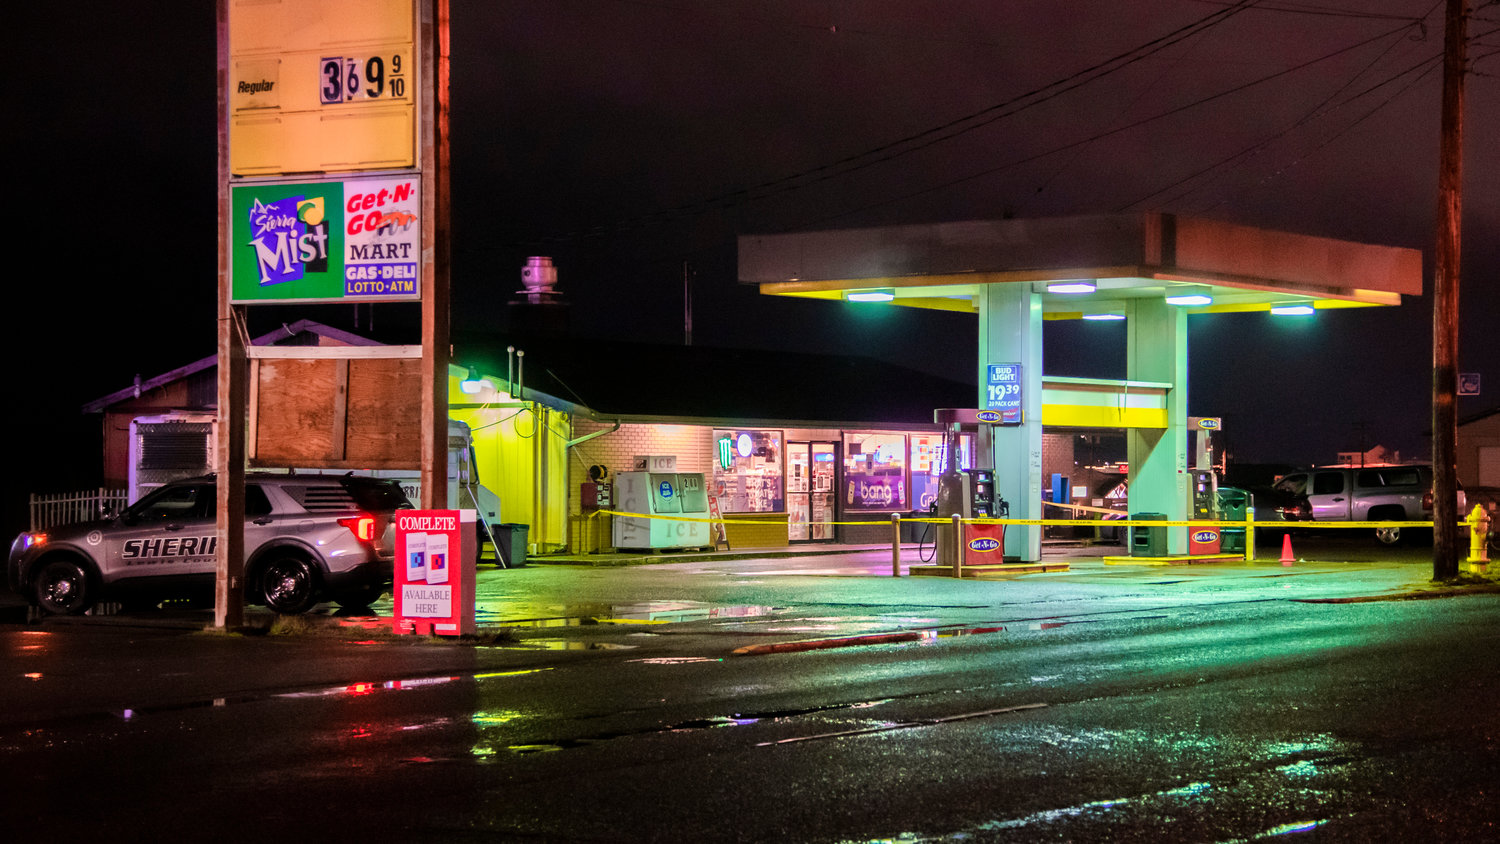 A Lewis County deputy is seen parked next to the Get-N-Go Mart in Chehalis where police tape surrounds pumps near the entrance of the building Monday night.